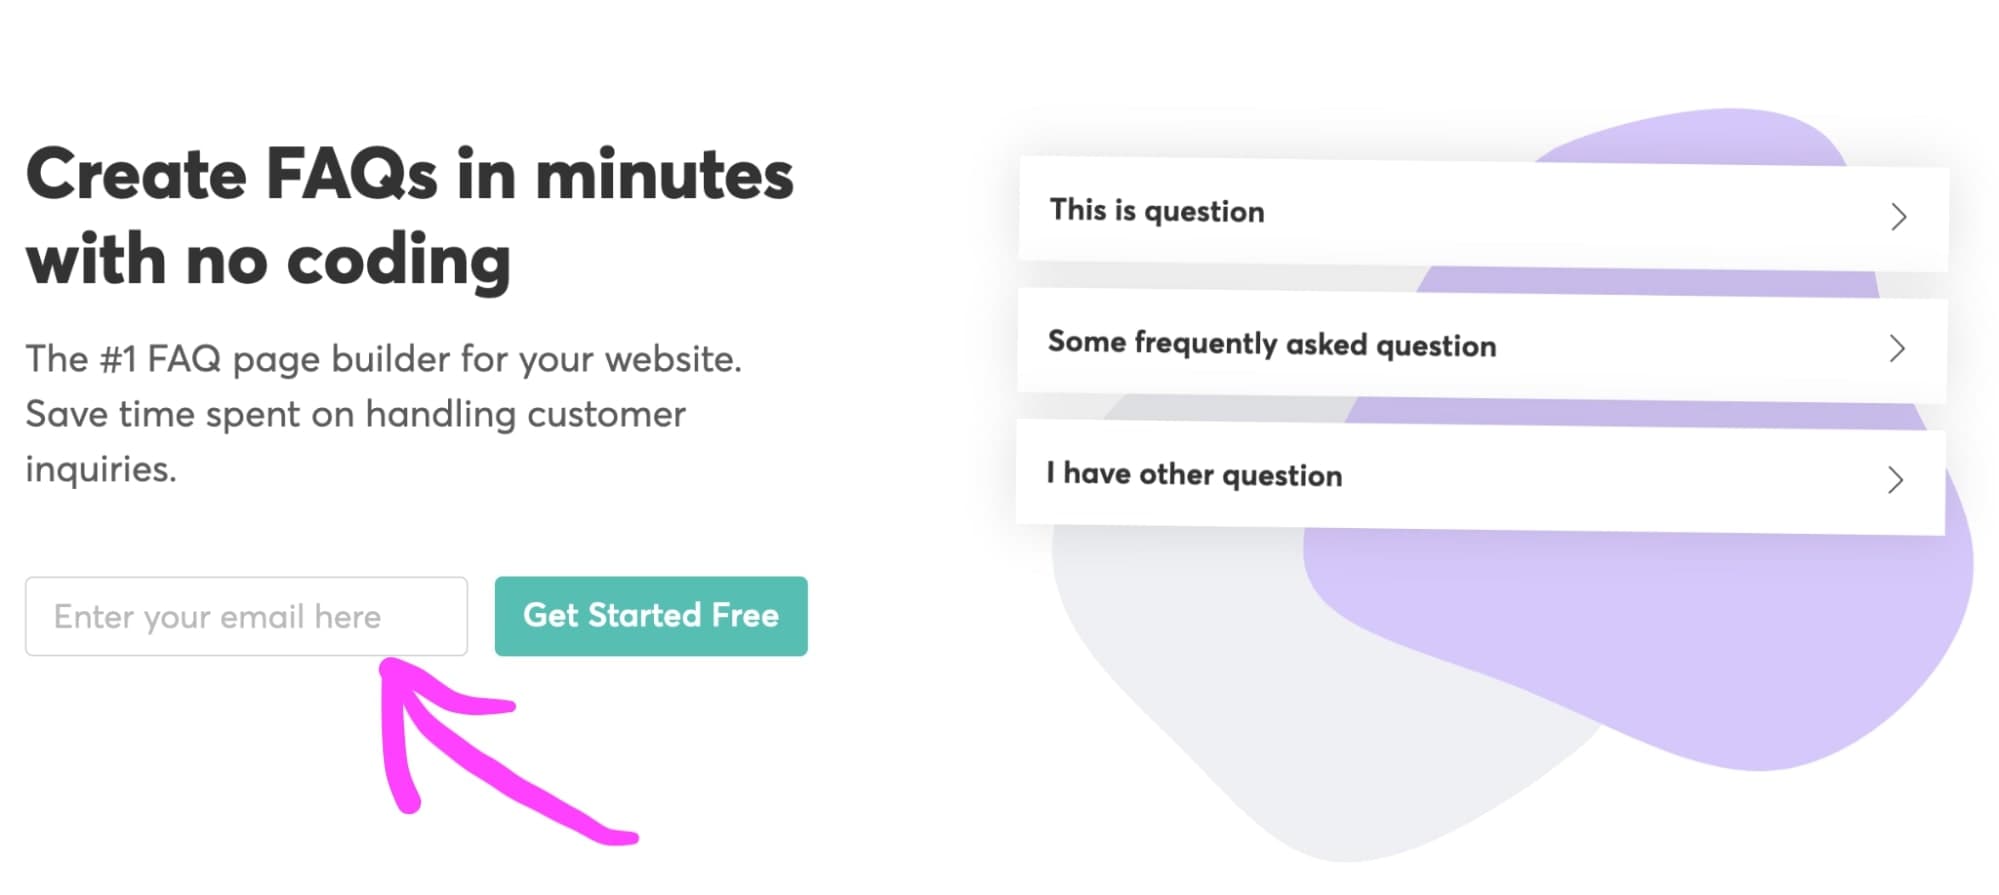 Creating FAQs for websites is a few clicks and no programming with EasyFAQ